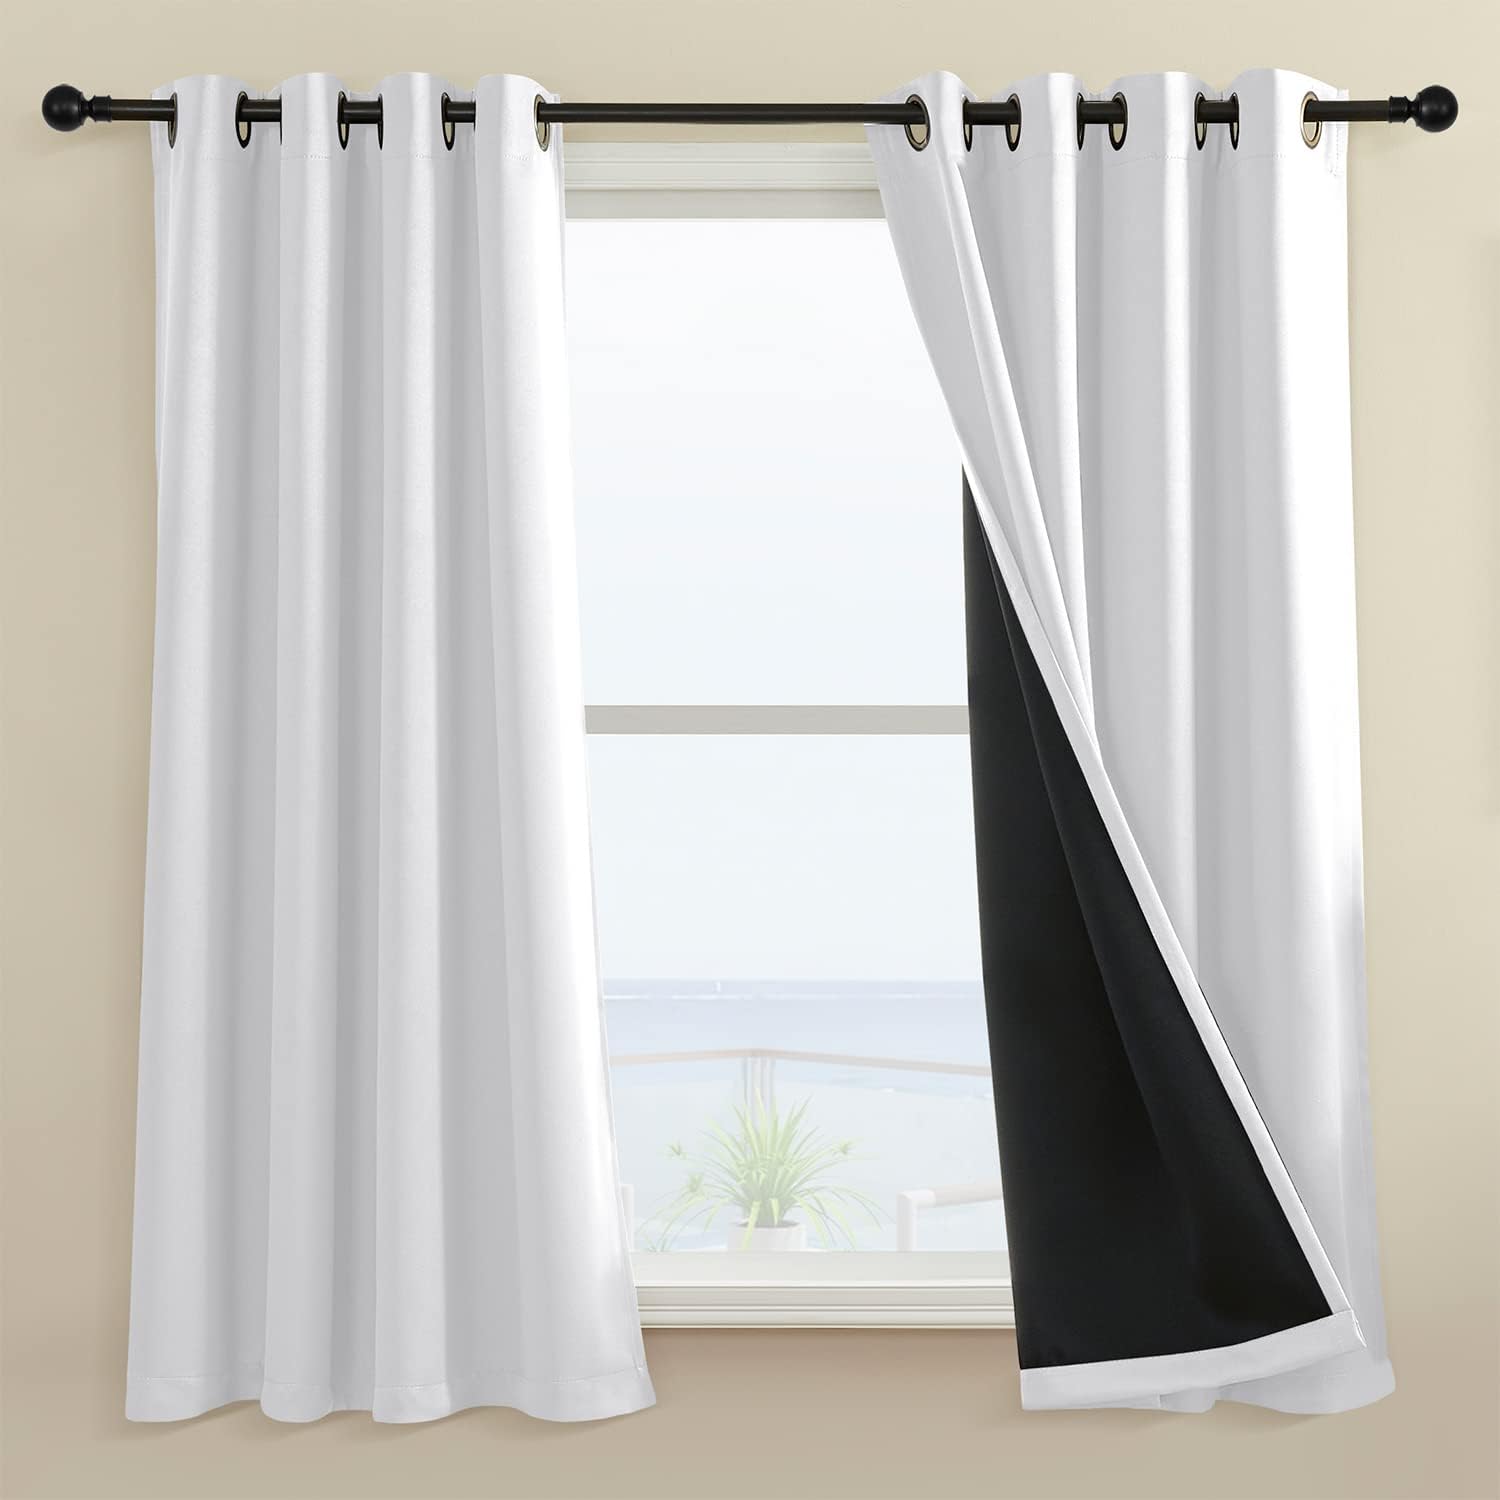 100% Blackout Curtain 2 Panels, Heat and Full Light [...]